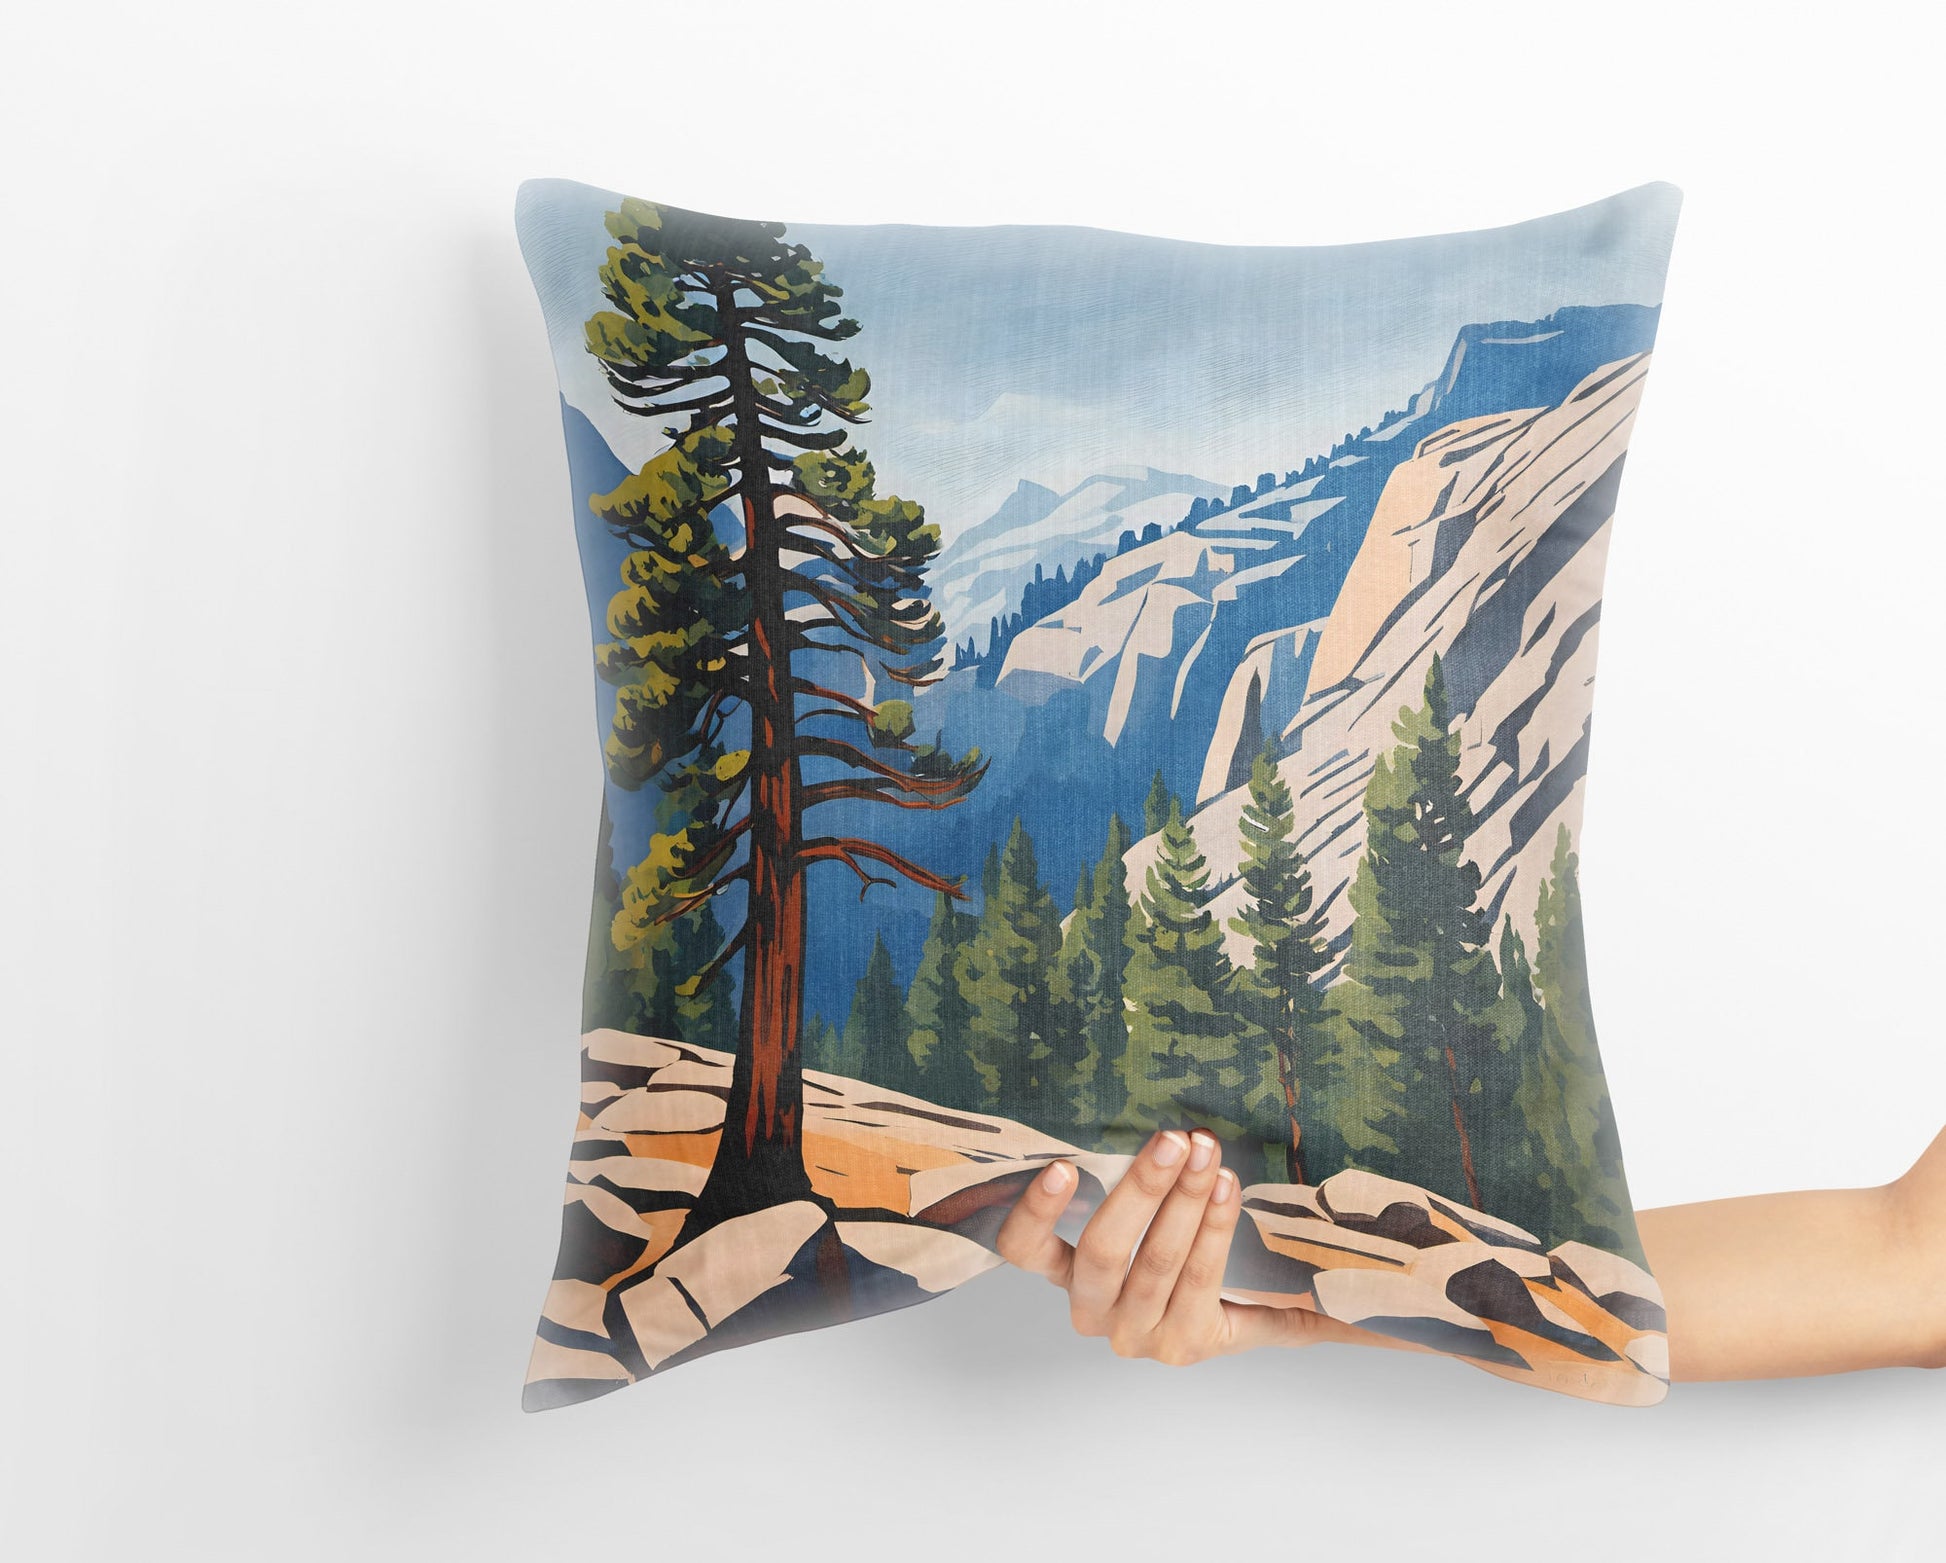 Olmsted Point In Yosemite National Park, California Throw Pillow, Usa Travel Pillow, 16X16 Case, Home And Living, Pillow Cases Kids